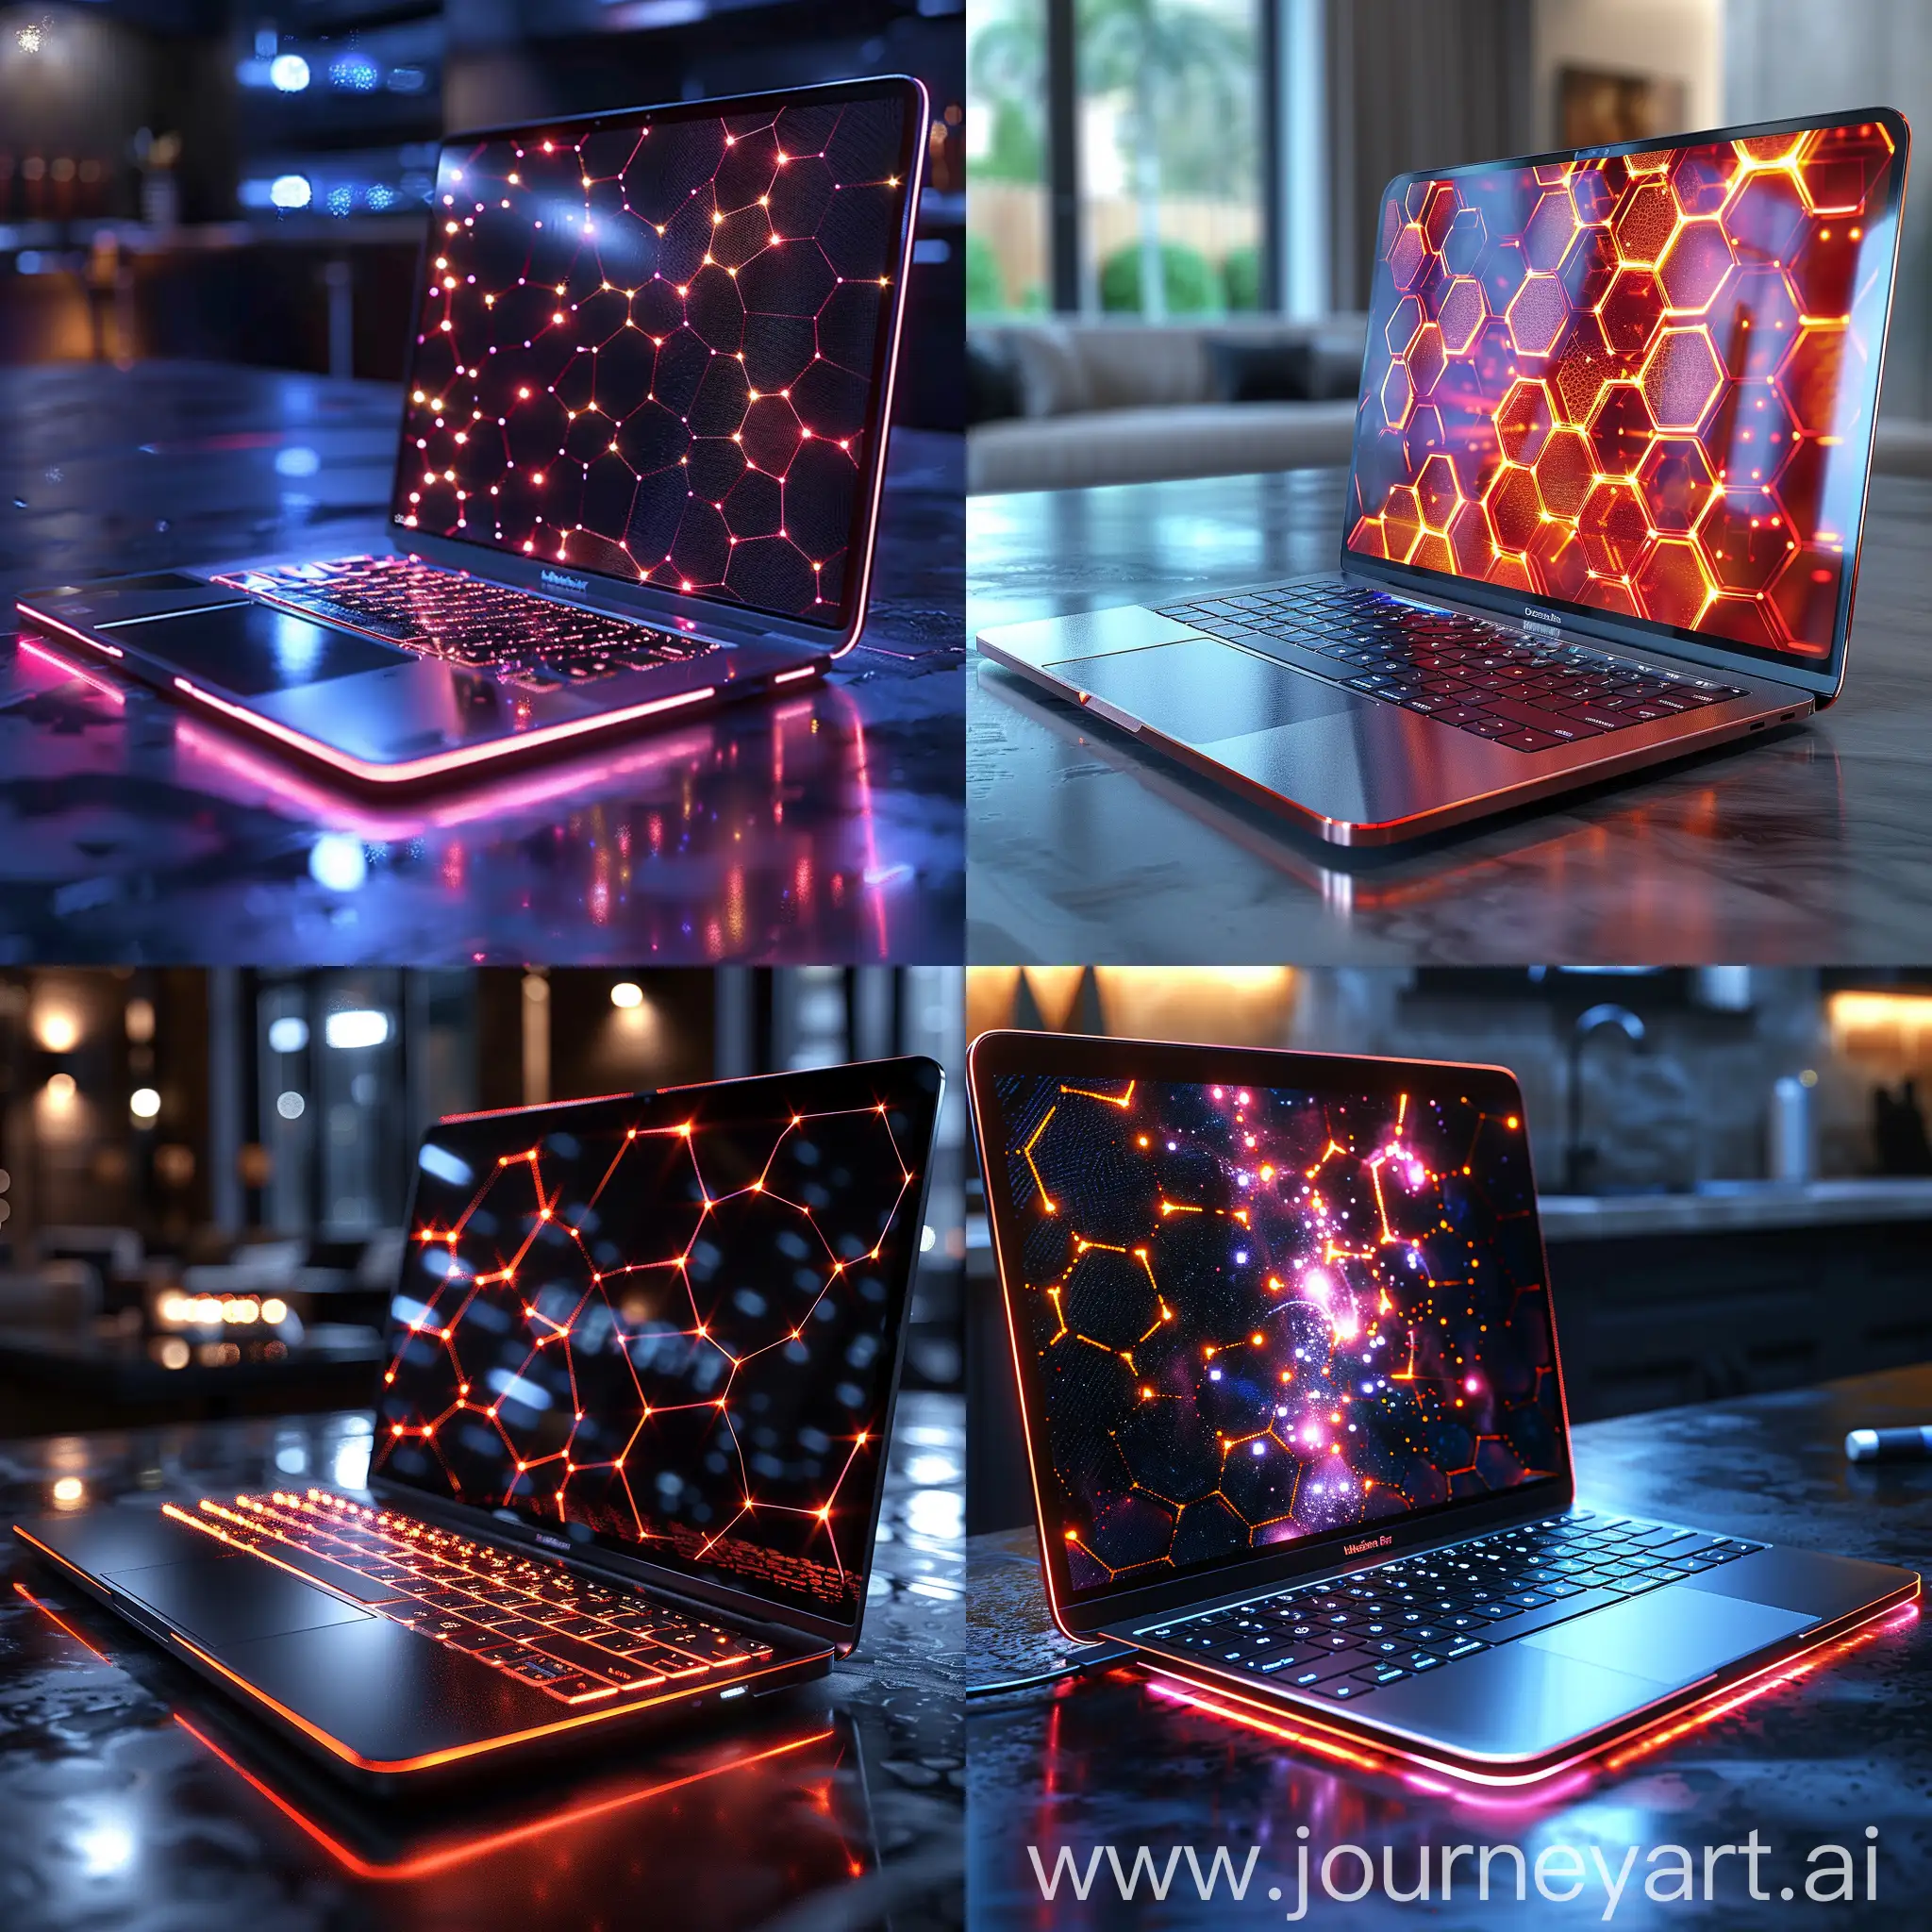 Futuristic-Graphene-Laptop-with-Stainless-Steel-Design